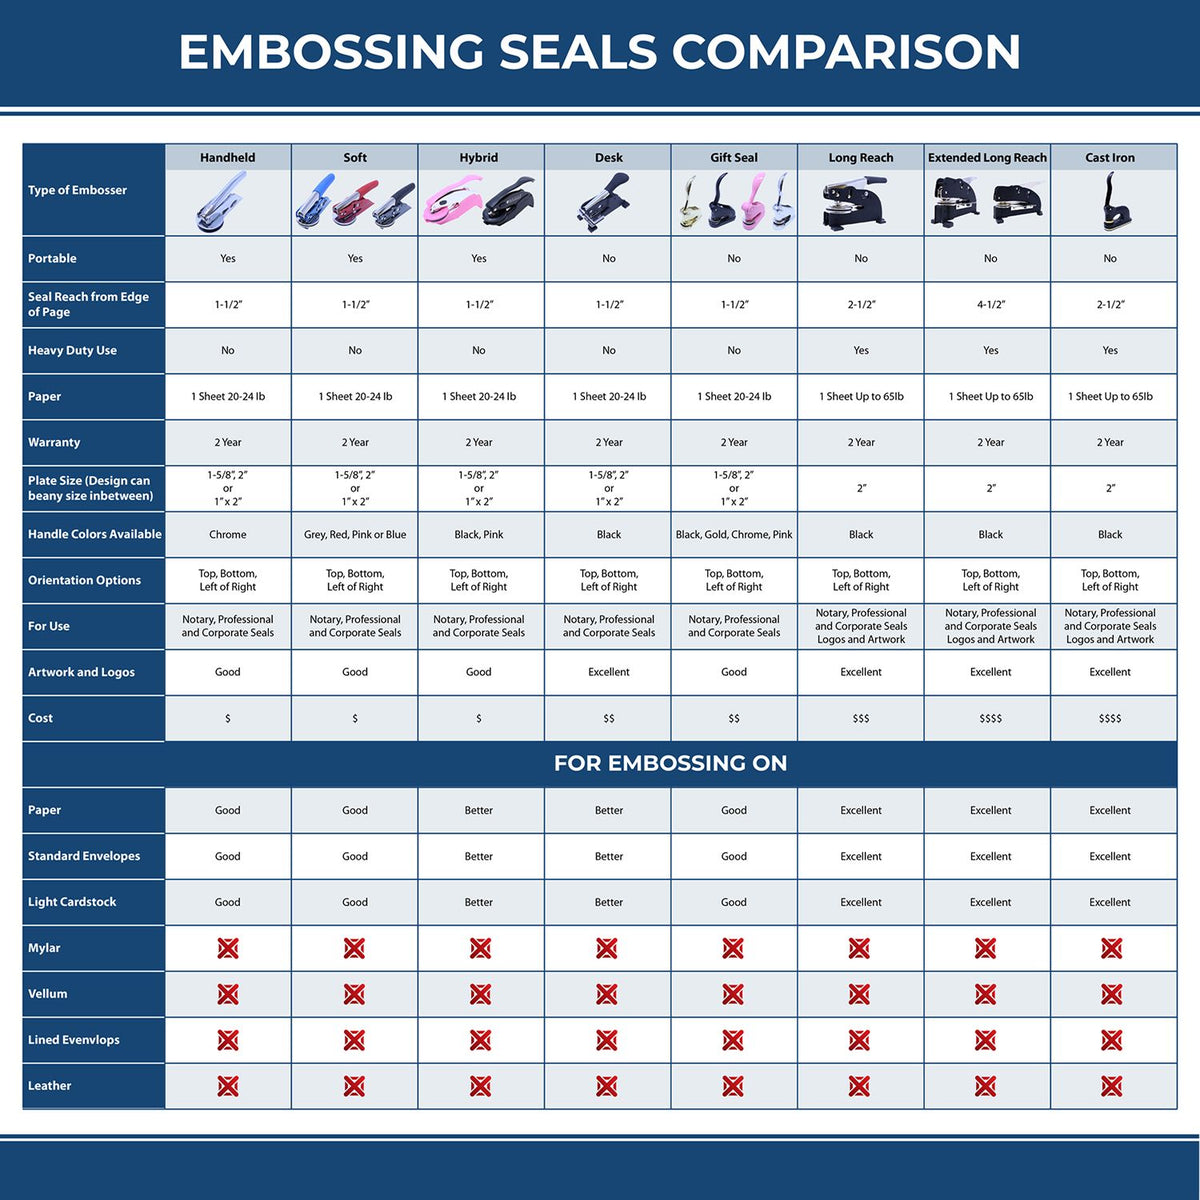 A comparison chart for the different types of mount models available for the Delaware Desk Architect Embossing Seal.